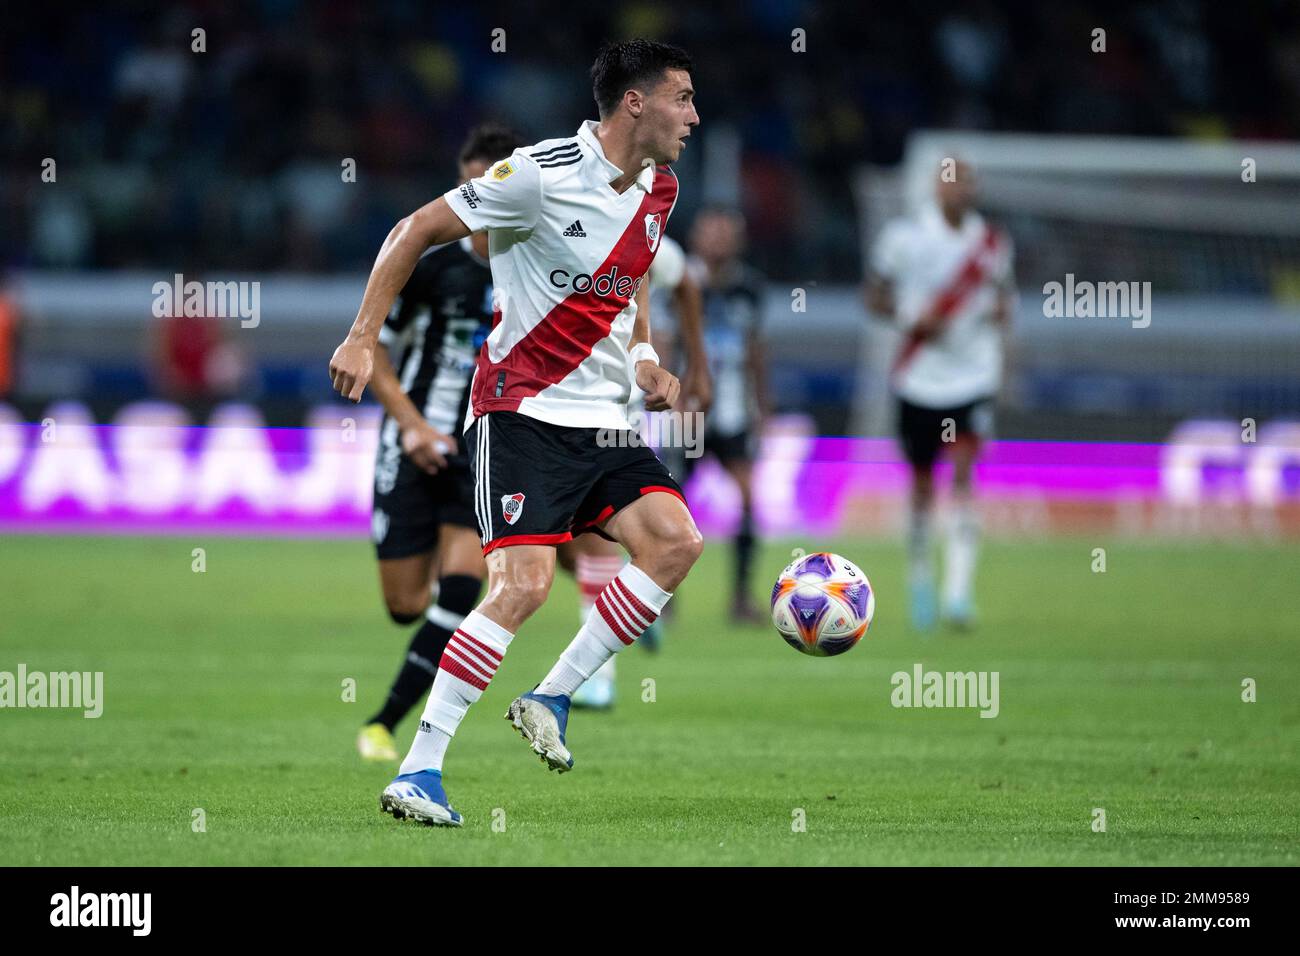 SANTIAGO DEL ESTERO, ARGENTINA, 28 January 2023:   Jose Paradela of River Plate control ball during the Torneo Binance 2023 of Argentine Liga Profesional match between Central Cordoba and River Plate at Stadium Único Madre de Ciudades in Santiago del Estero, Argentina on 28 January 2023. Photo by SFSI Stock Photo